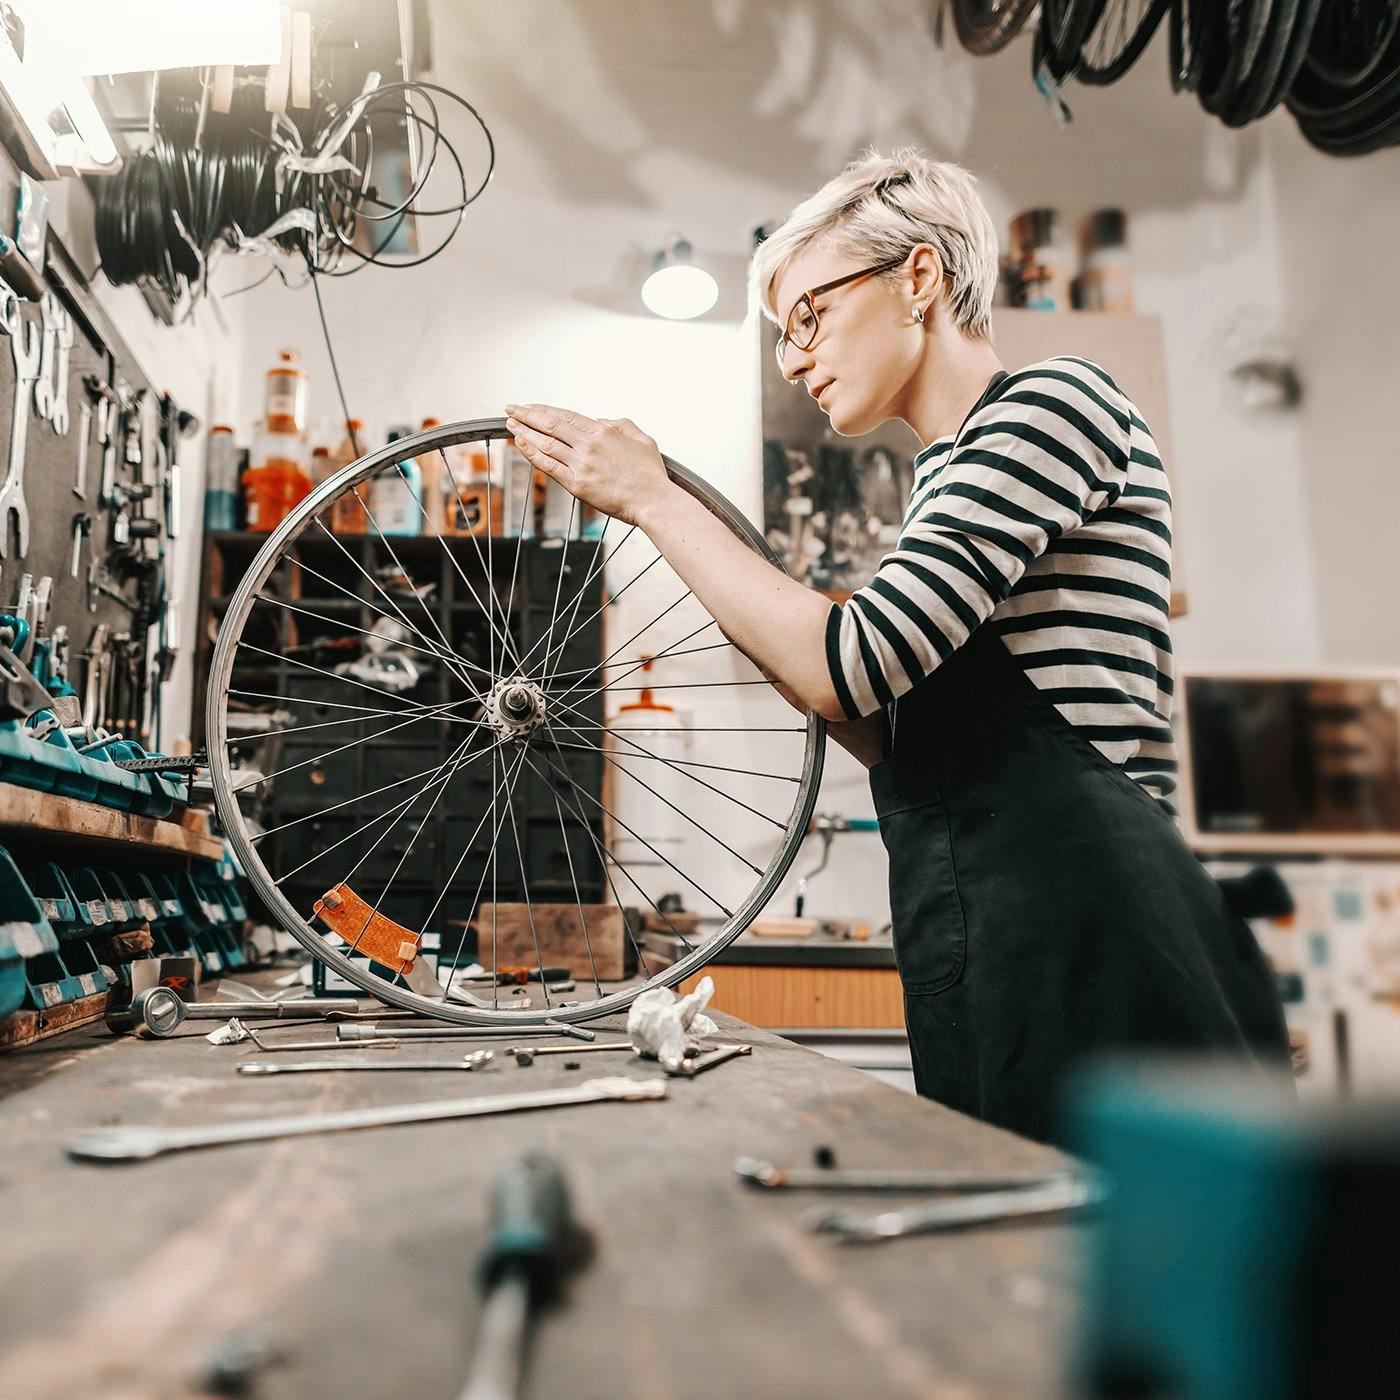 A woman working with a bicycle wheel